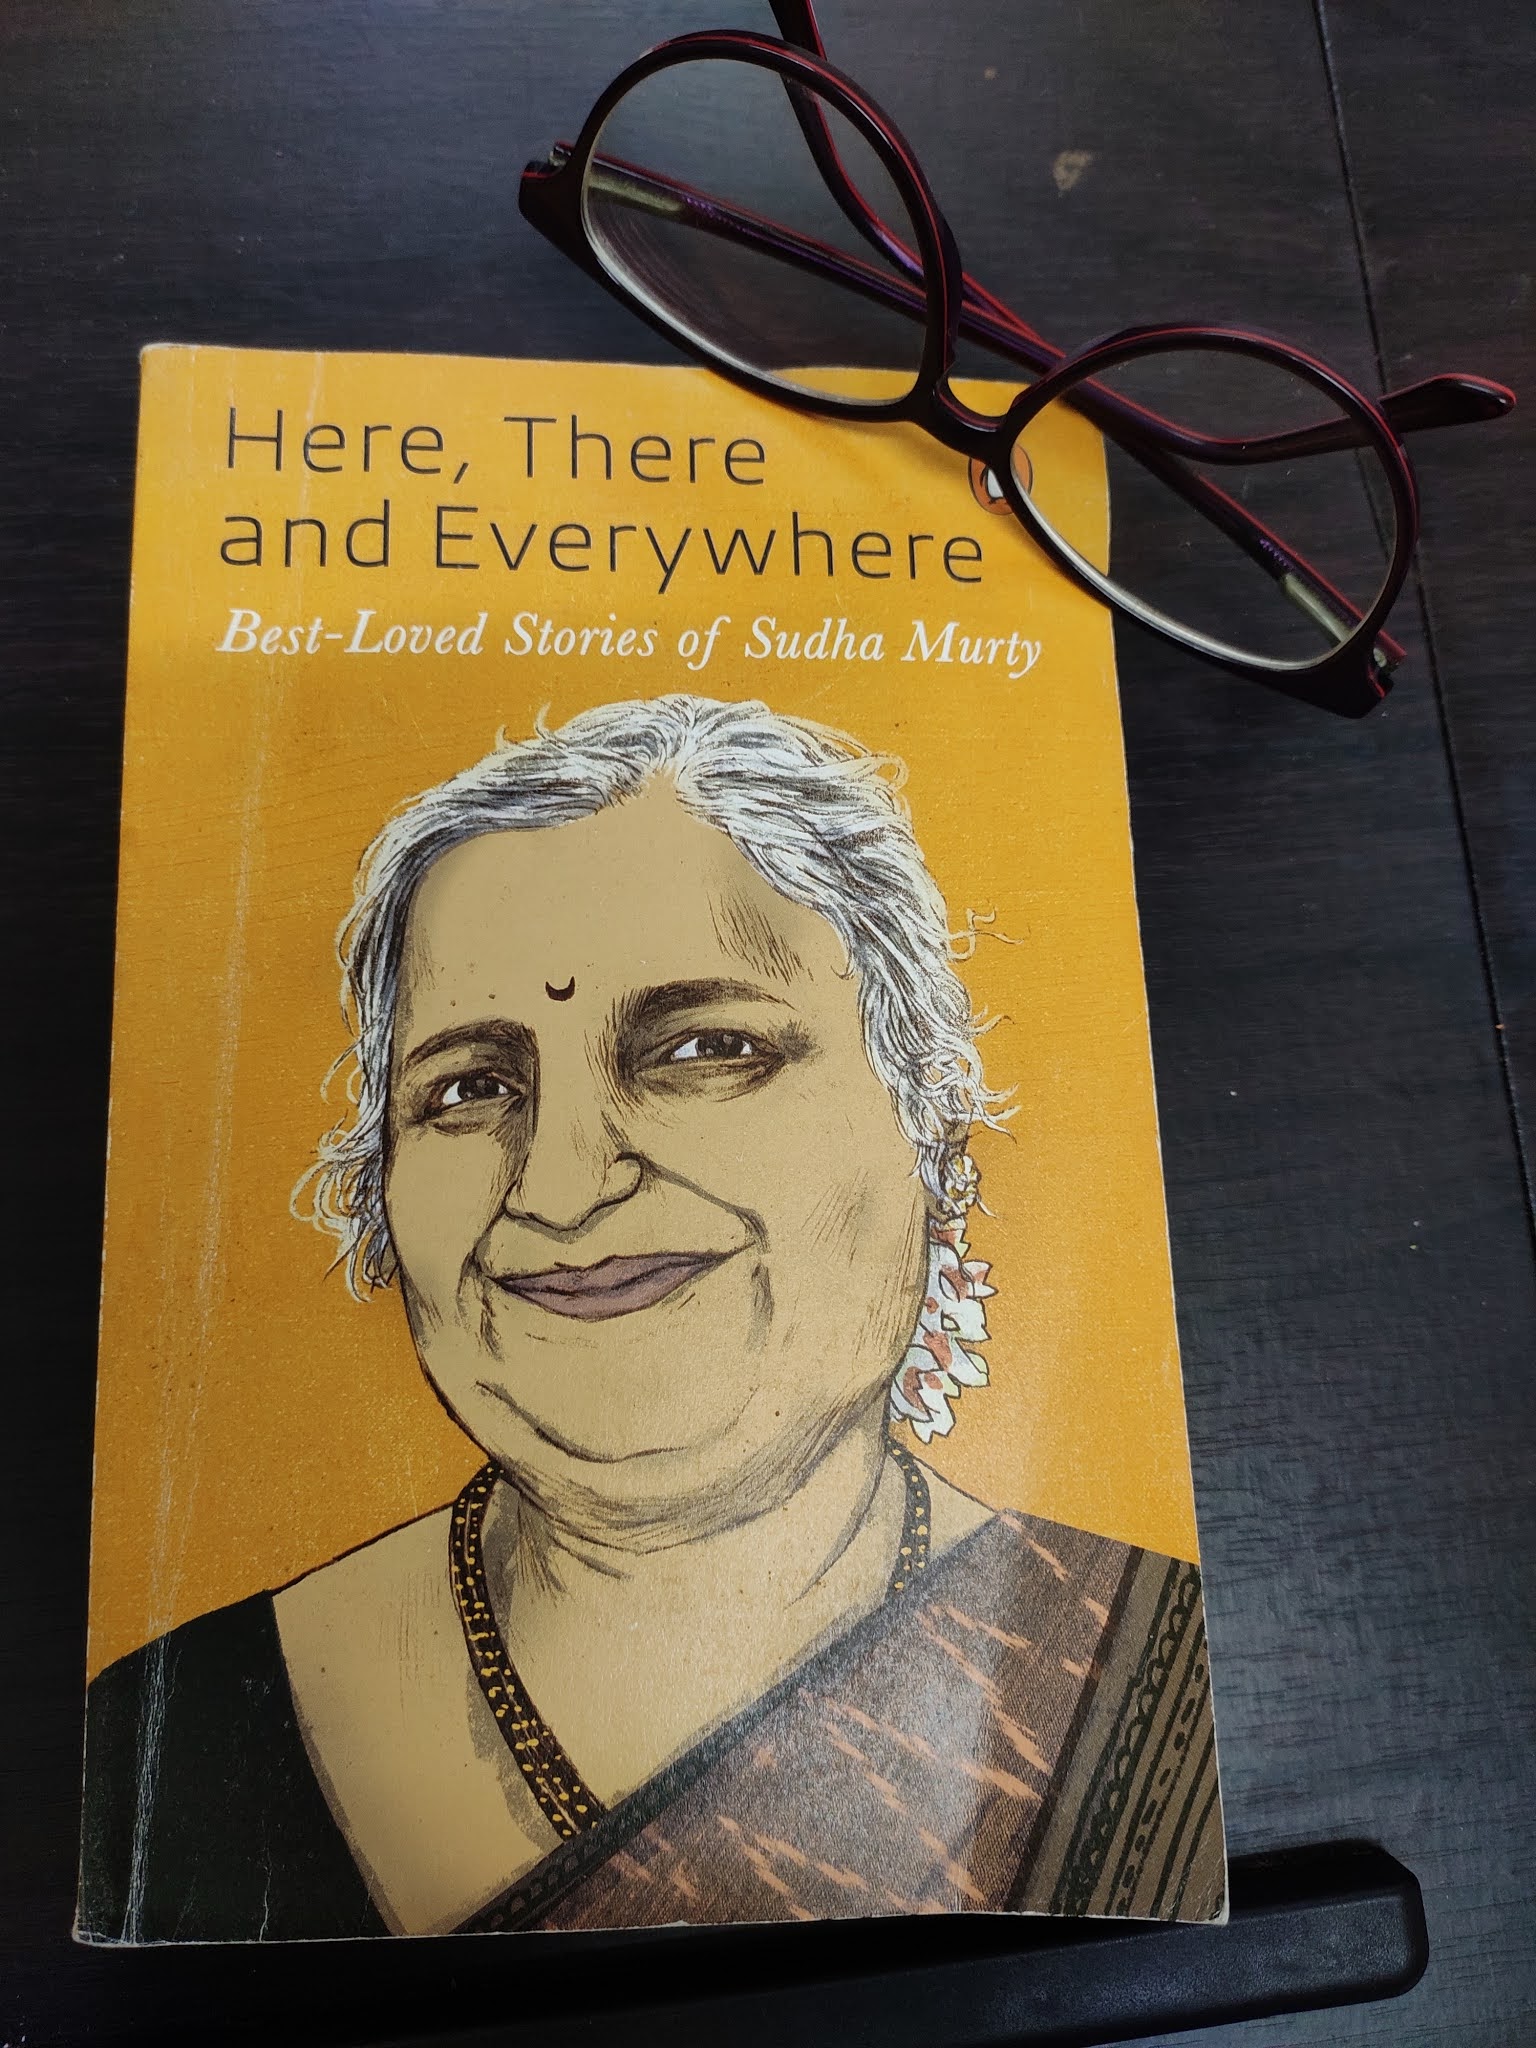 book review of sudha murthy stories